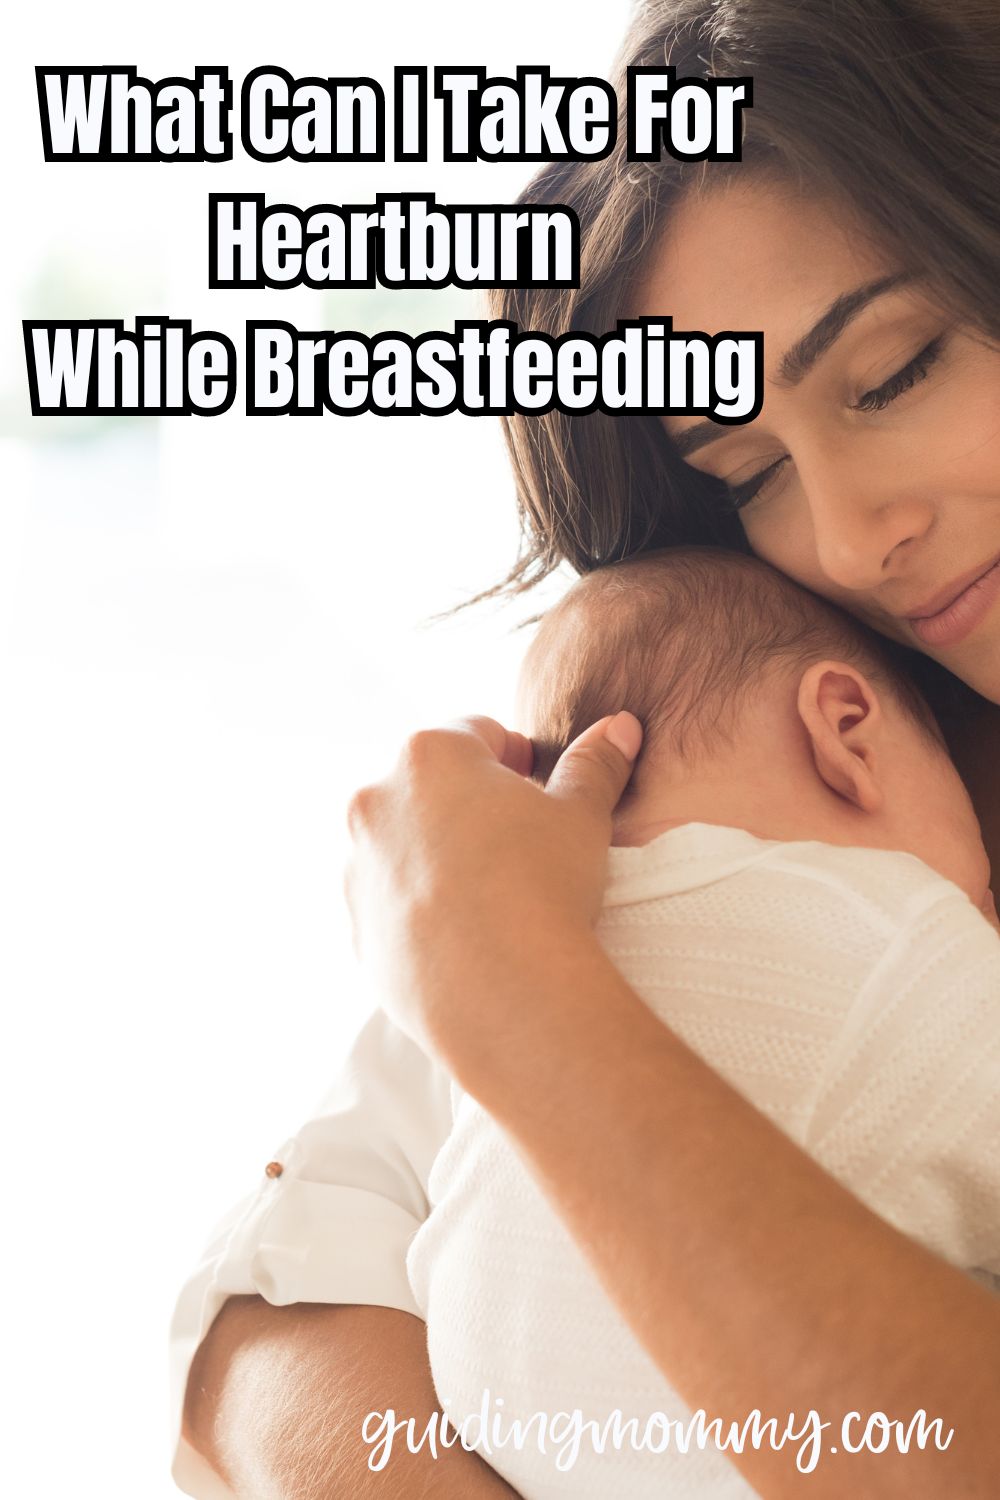 What Can I take for Heartburn while Breastfeeding